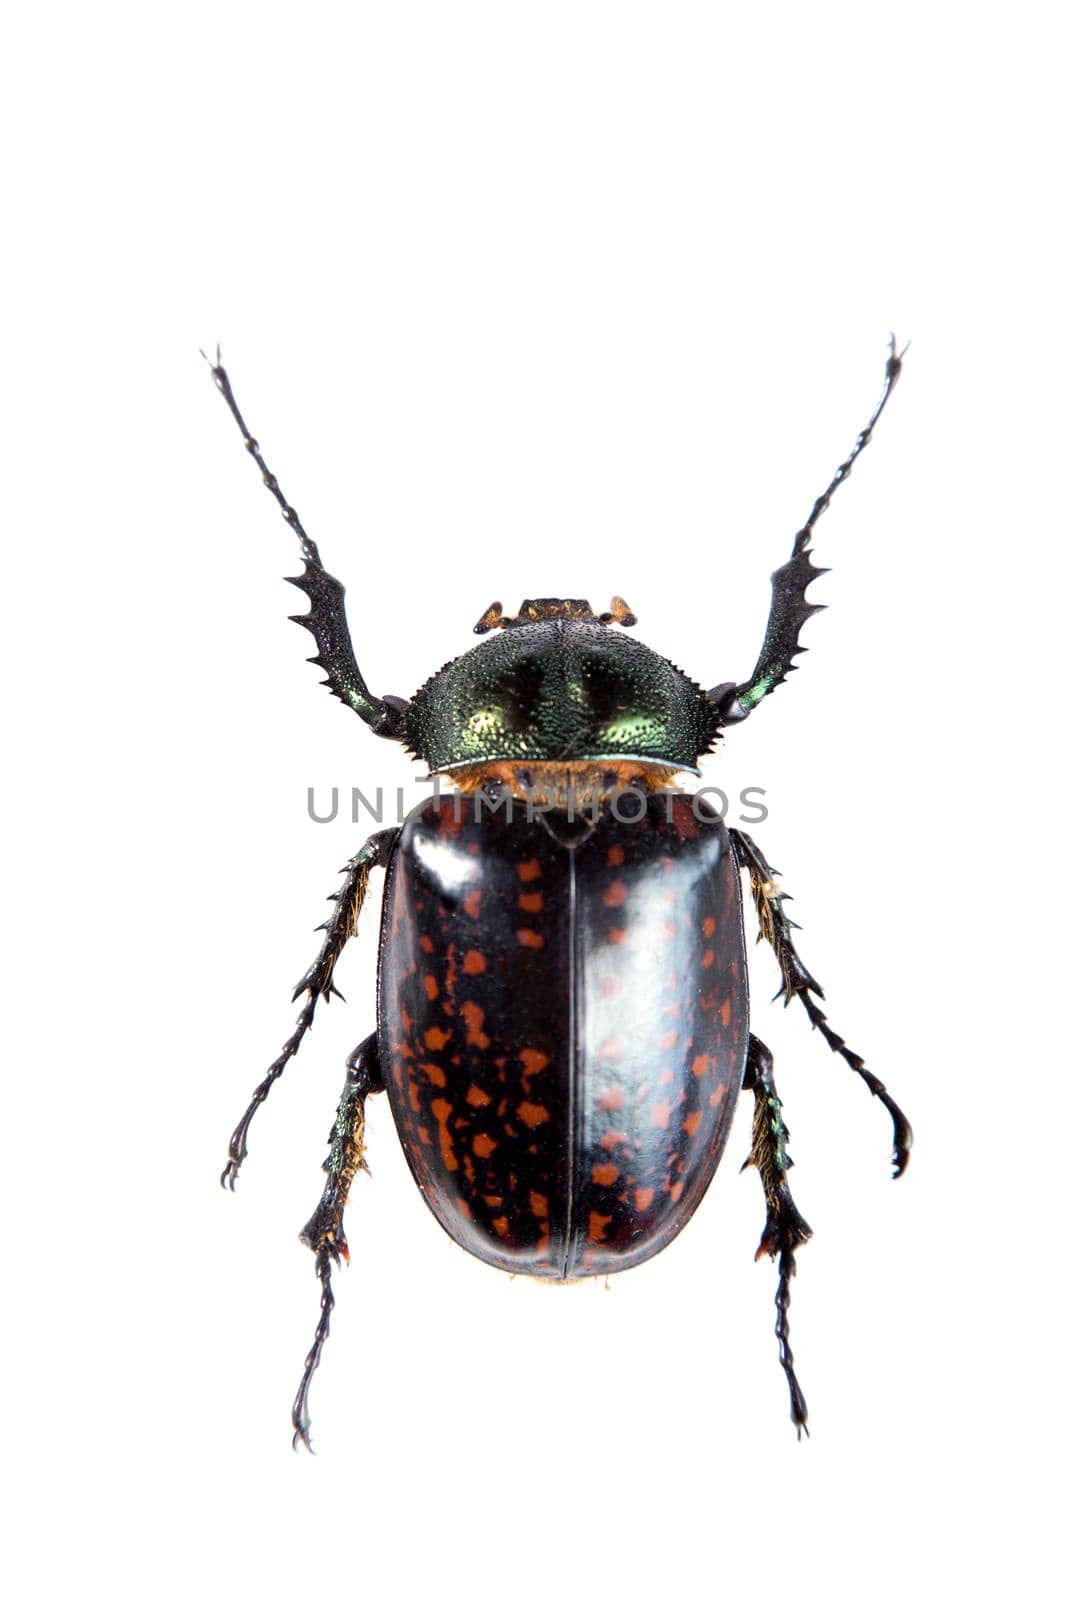 Arlequin beetle on the white background by RosaJay